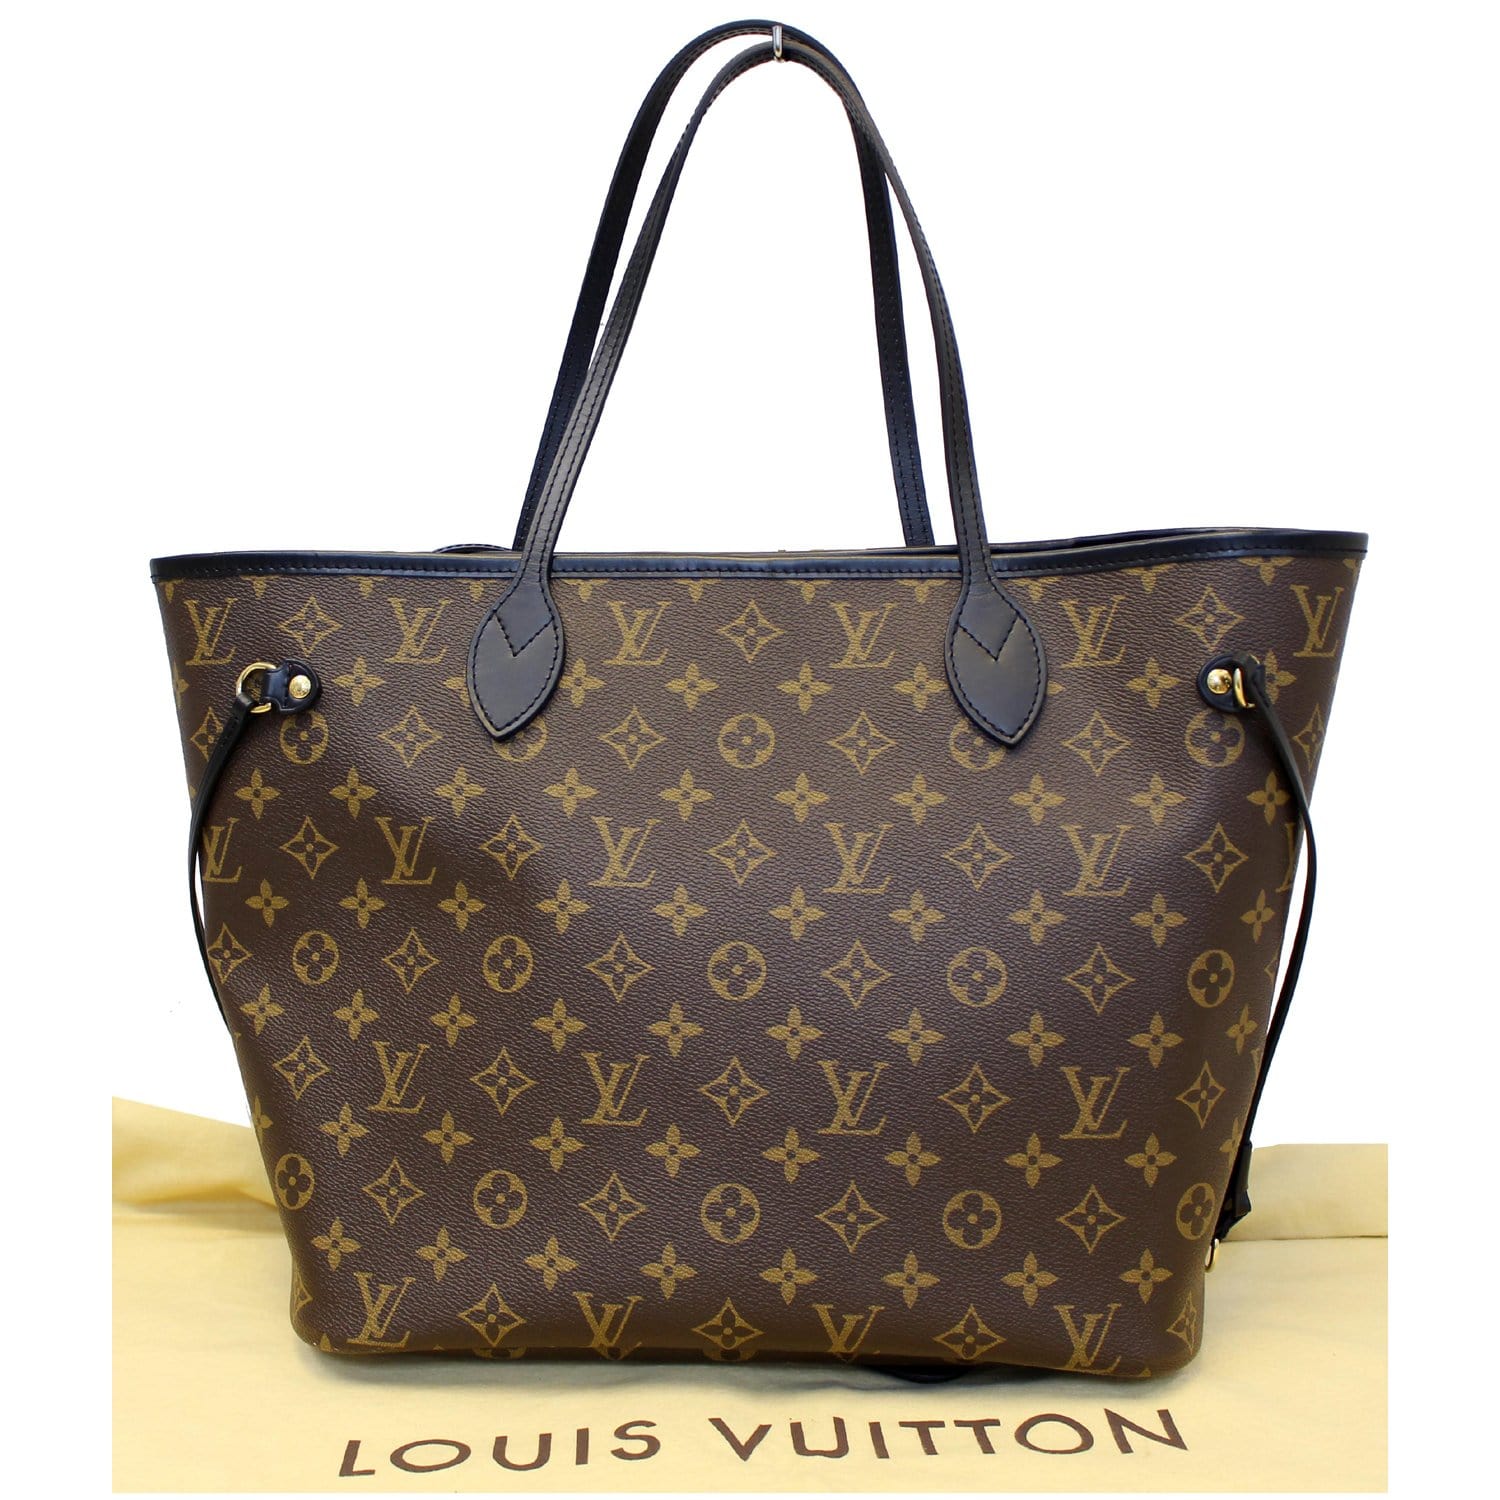 Louis Vuitton Neverfull Bags: Ultimate Guide